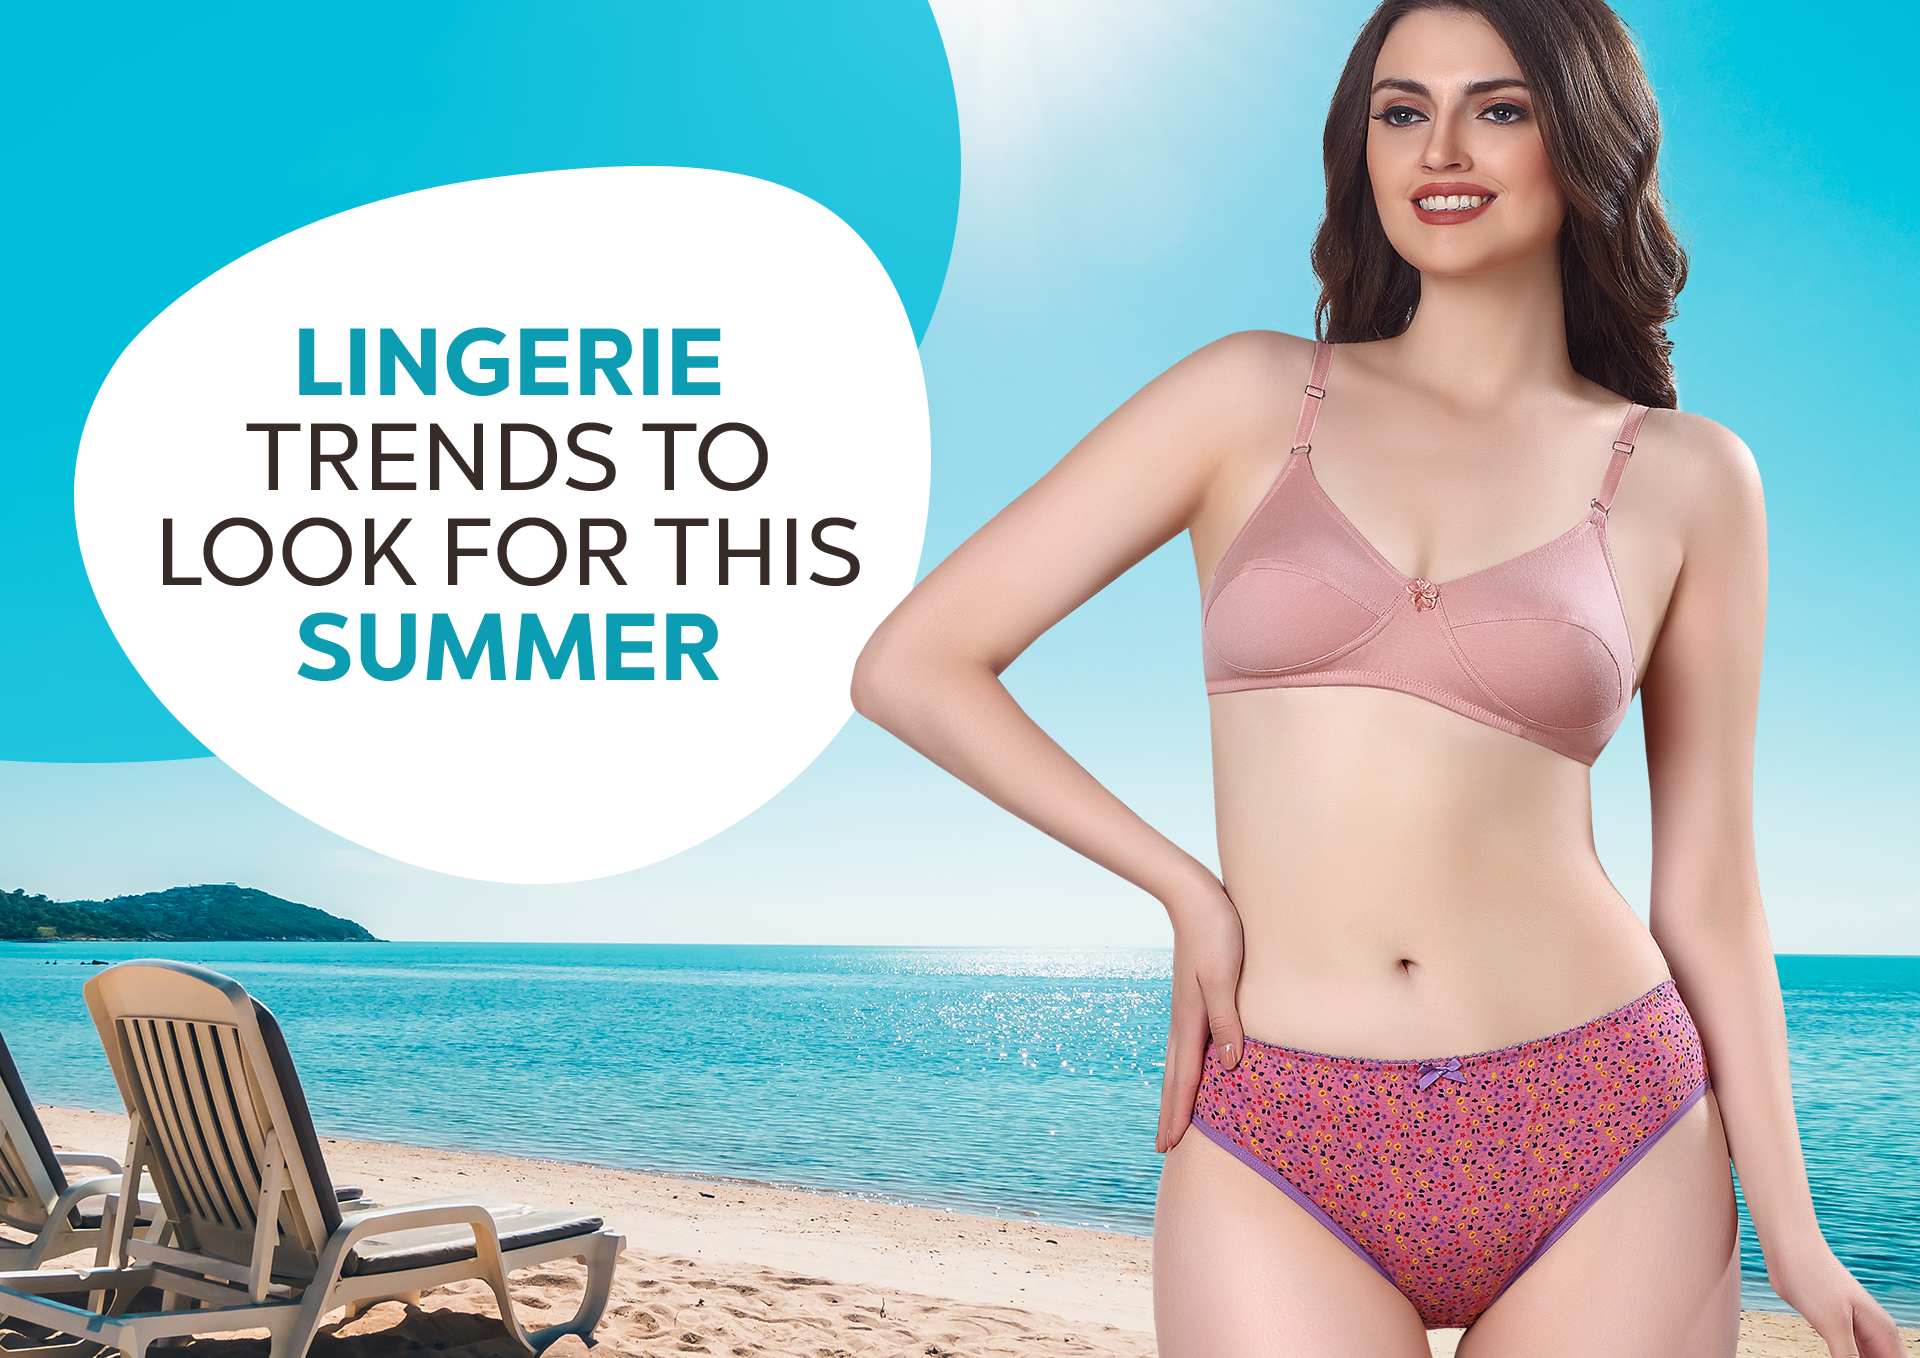 Lingerie Trends To Look For This Summer